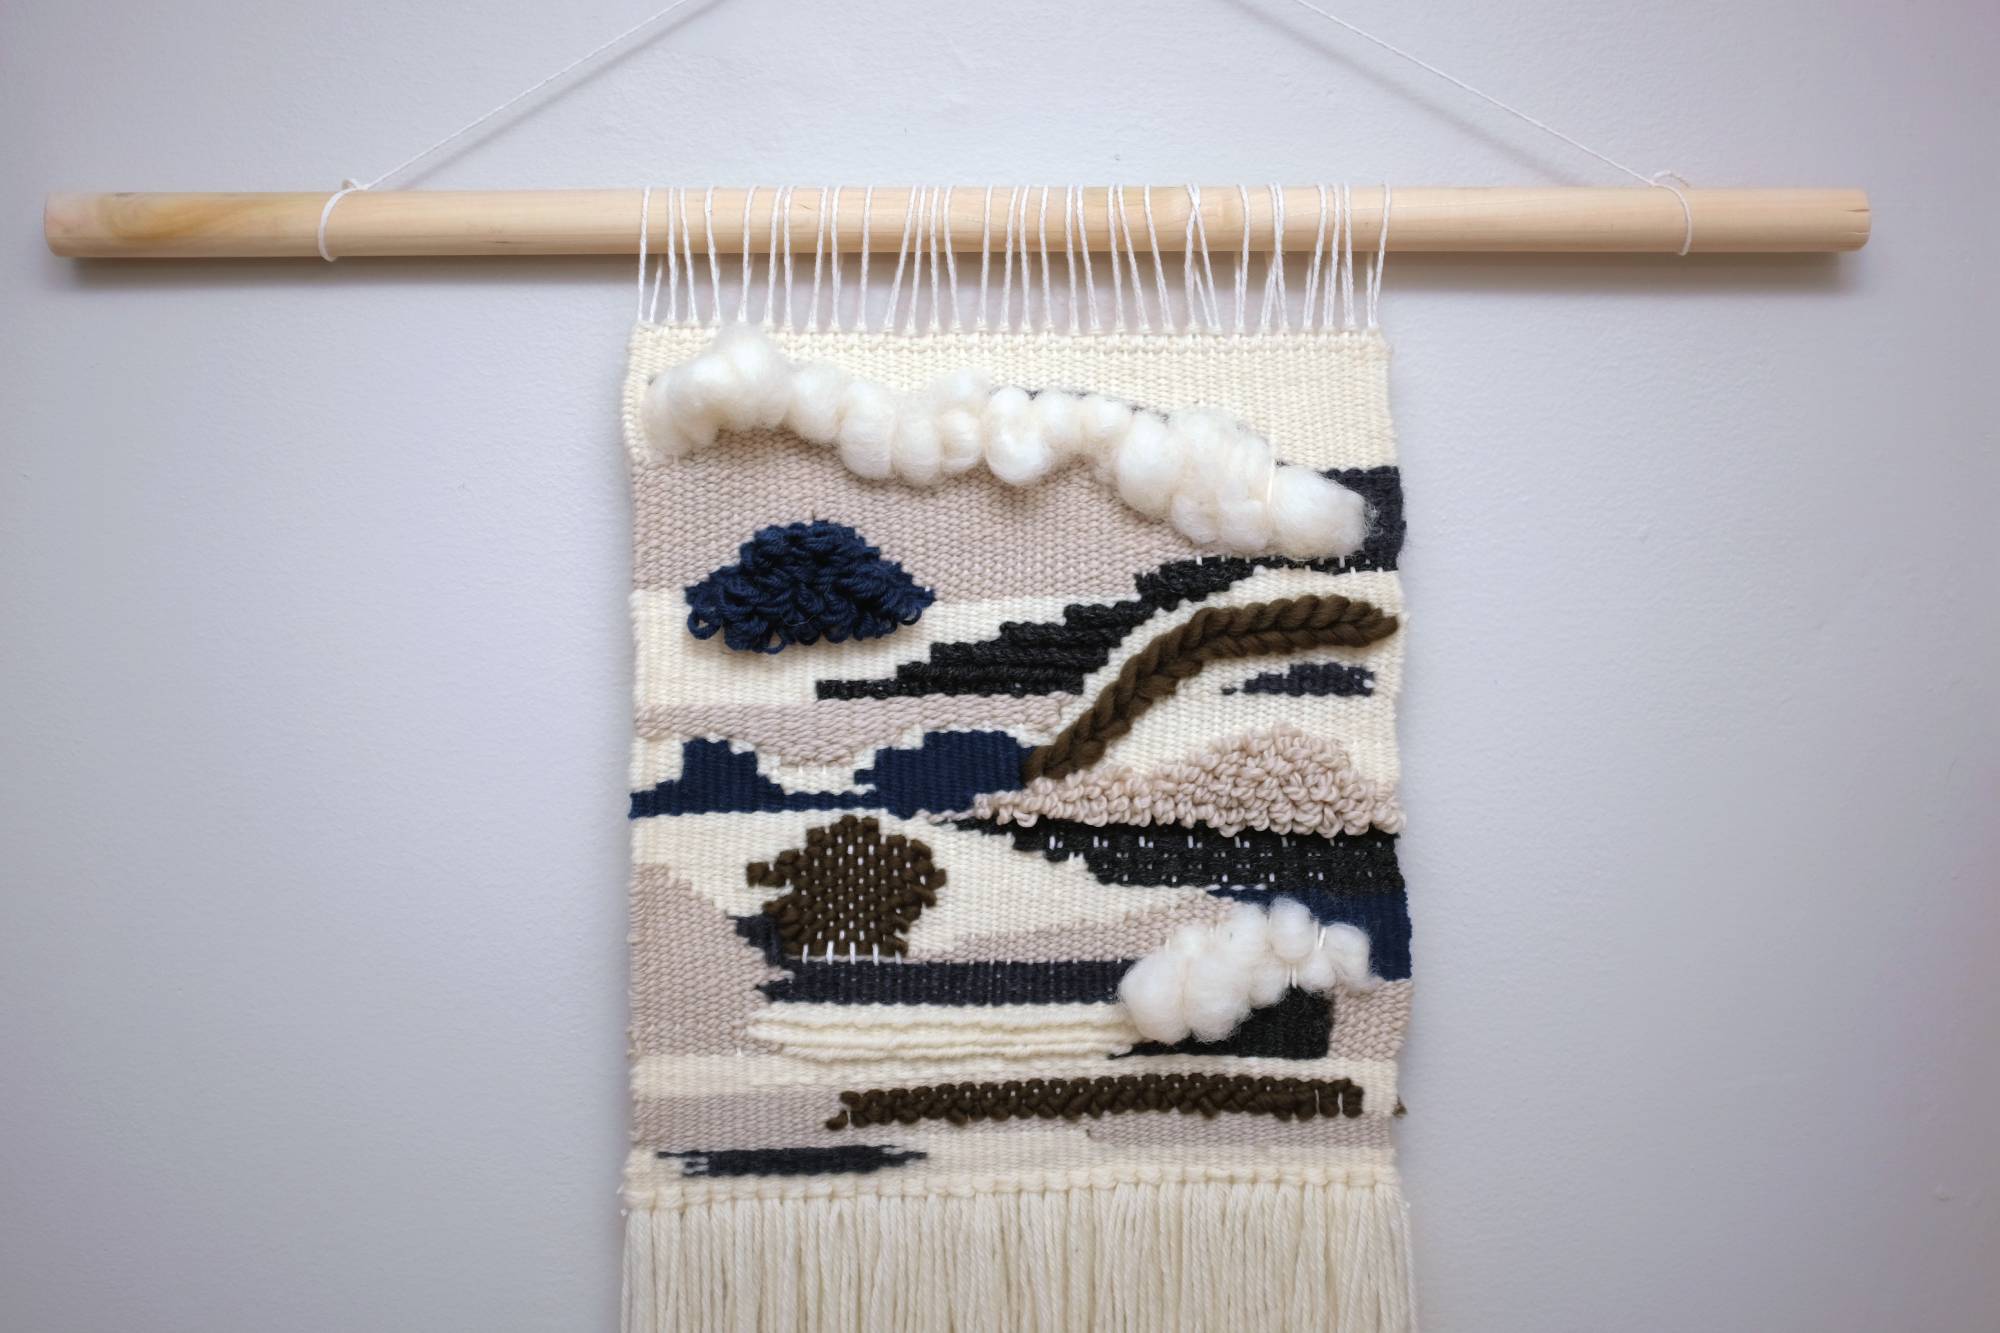 a close-up of the same weaving made by the author